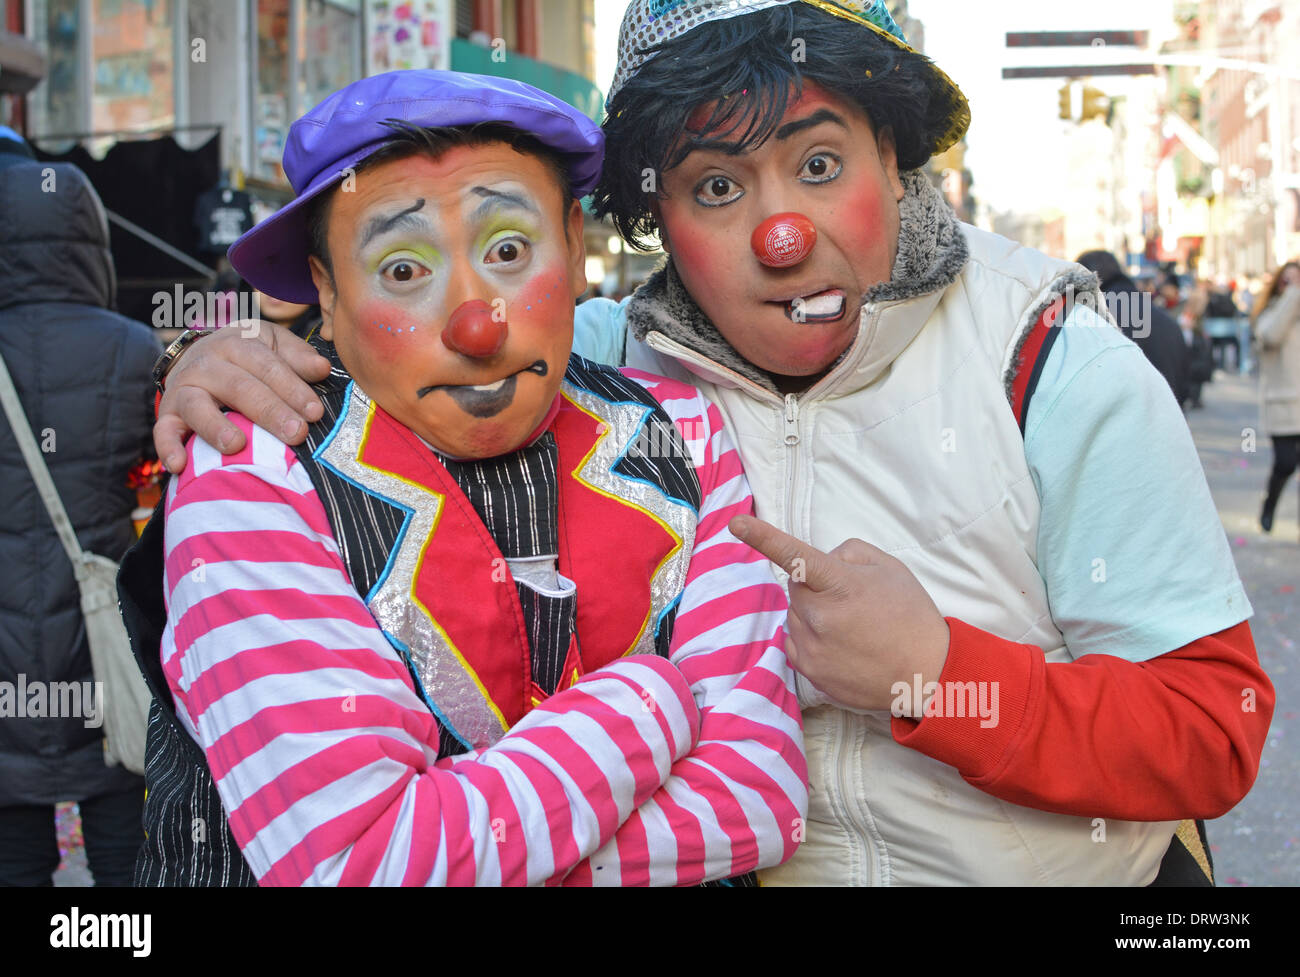 2 Mexican American clowns at the Chinese New Year parade on Mott Street in Chinatown, New York City. Stock Photo